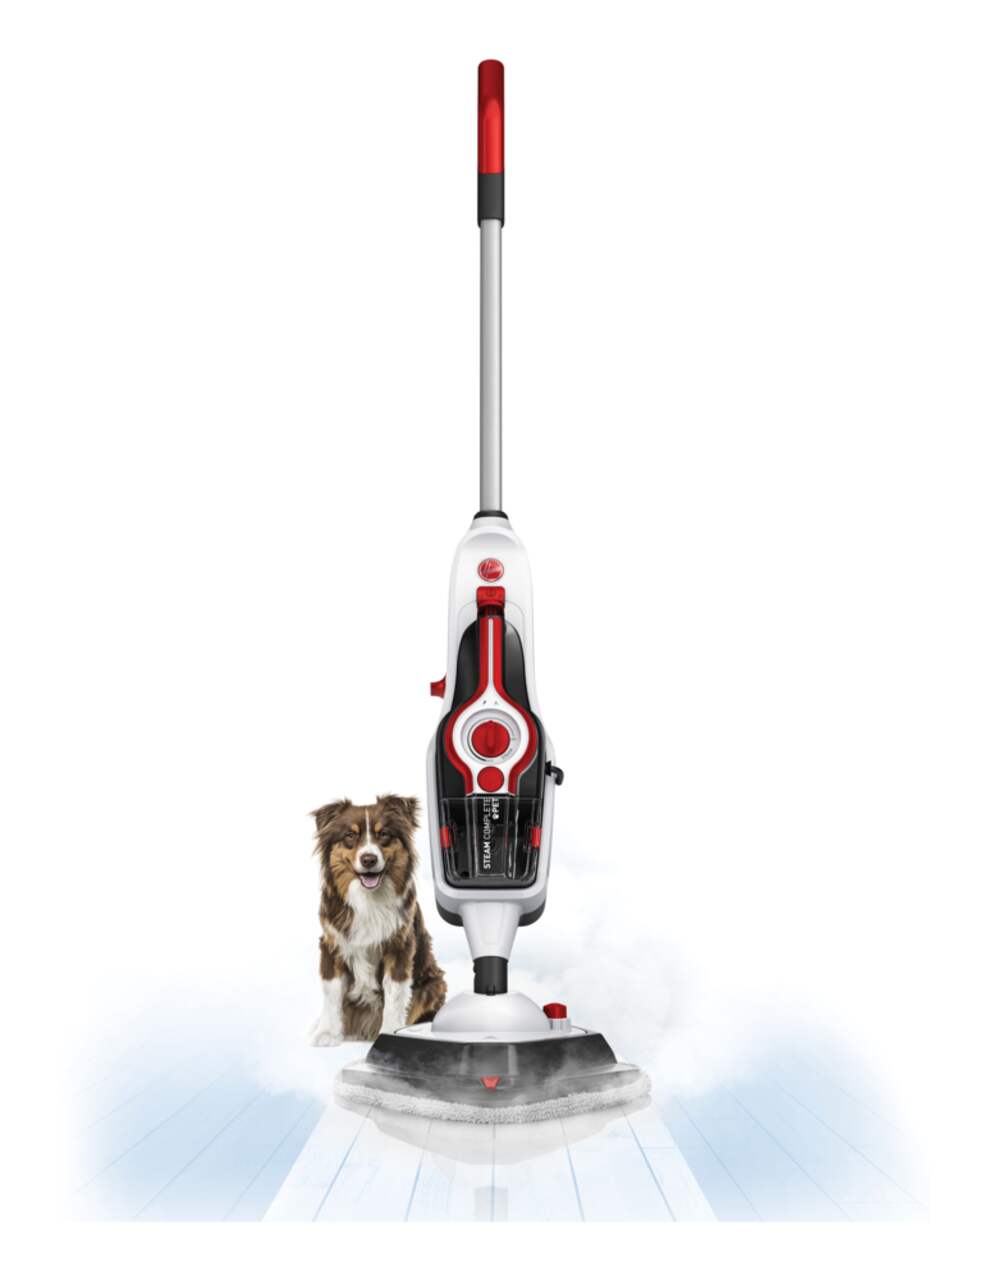 https://media-www.canadiantire.ca/product/living/cleaning/vacuums-and-floorcare/0438496/hoover-expert-series-pet-steam-lift-7489d3f1-4438-4b64-a42b-1dba6bd8e9de.png?imdensity=1&imwidth=1244&impolicy=mZoom